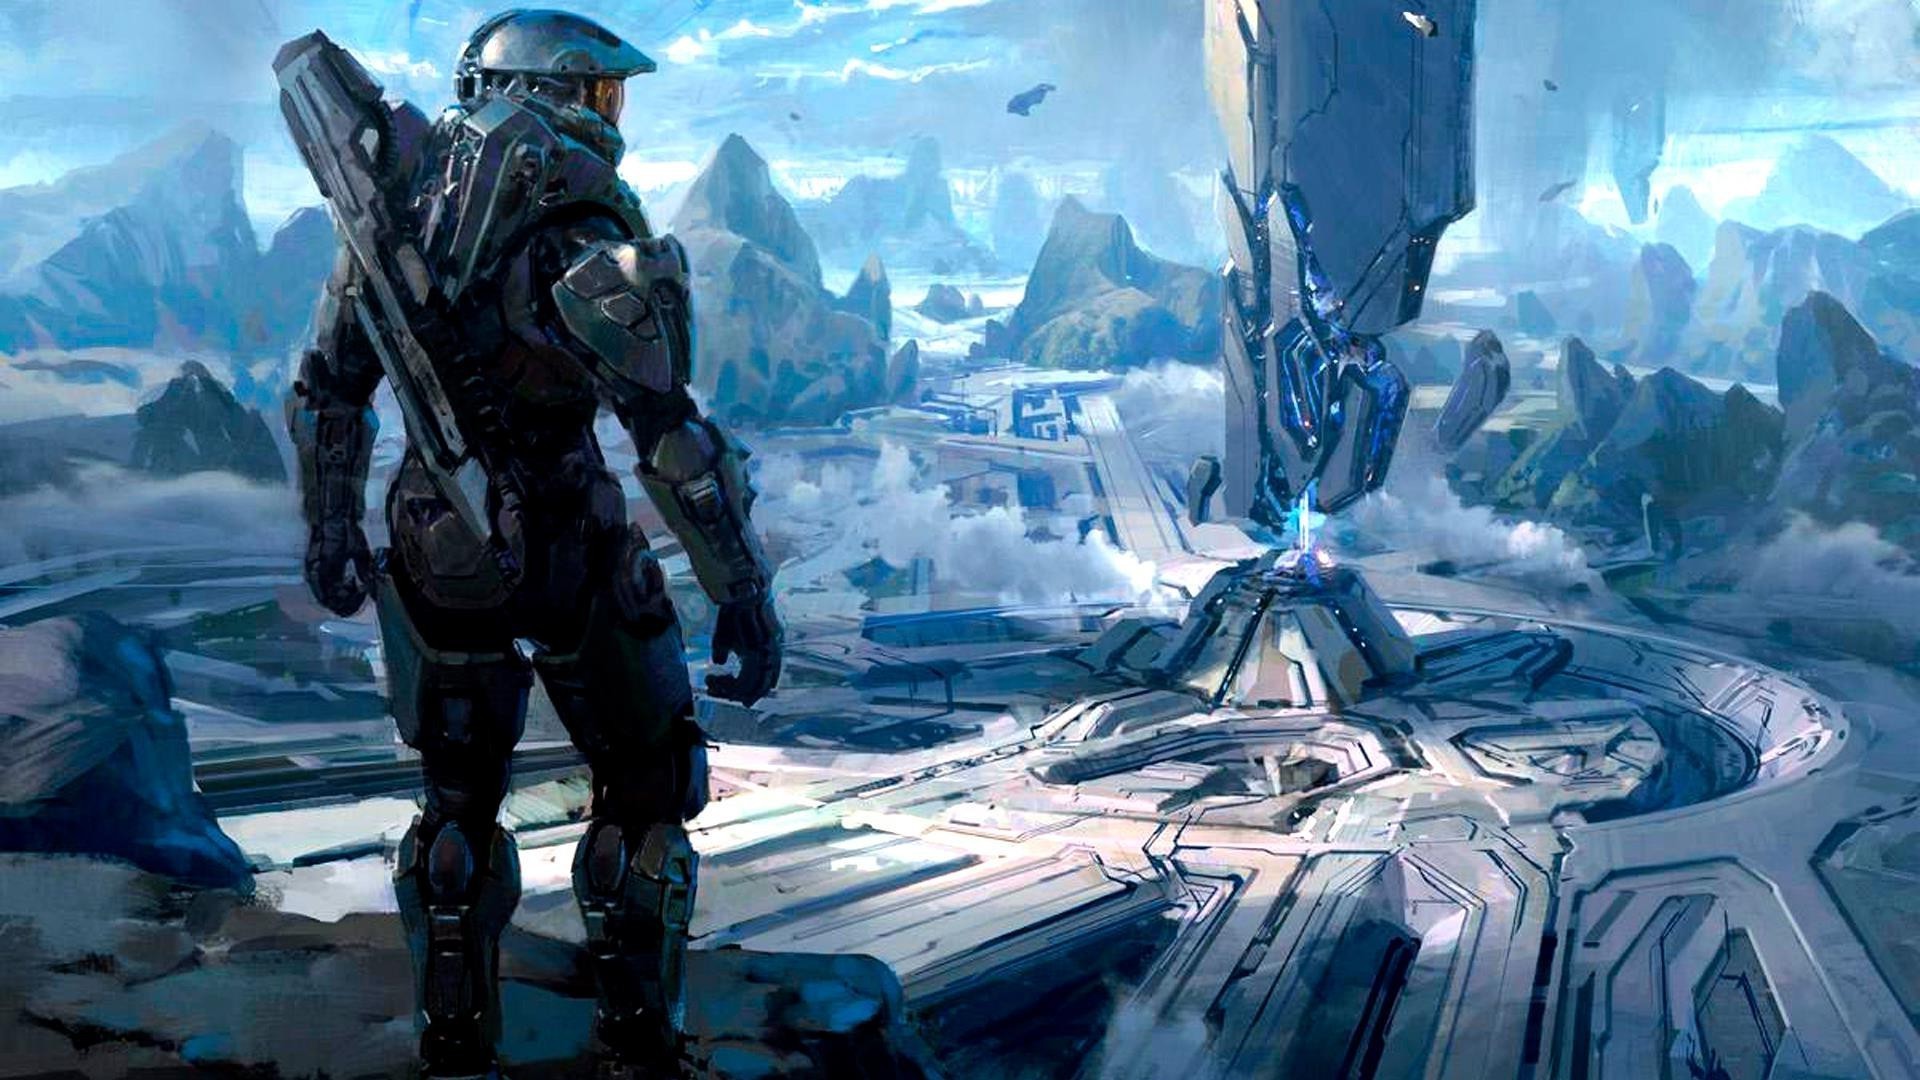 1920x1080 Halo: The Master Chief Collection HD Wallpapers